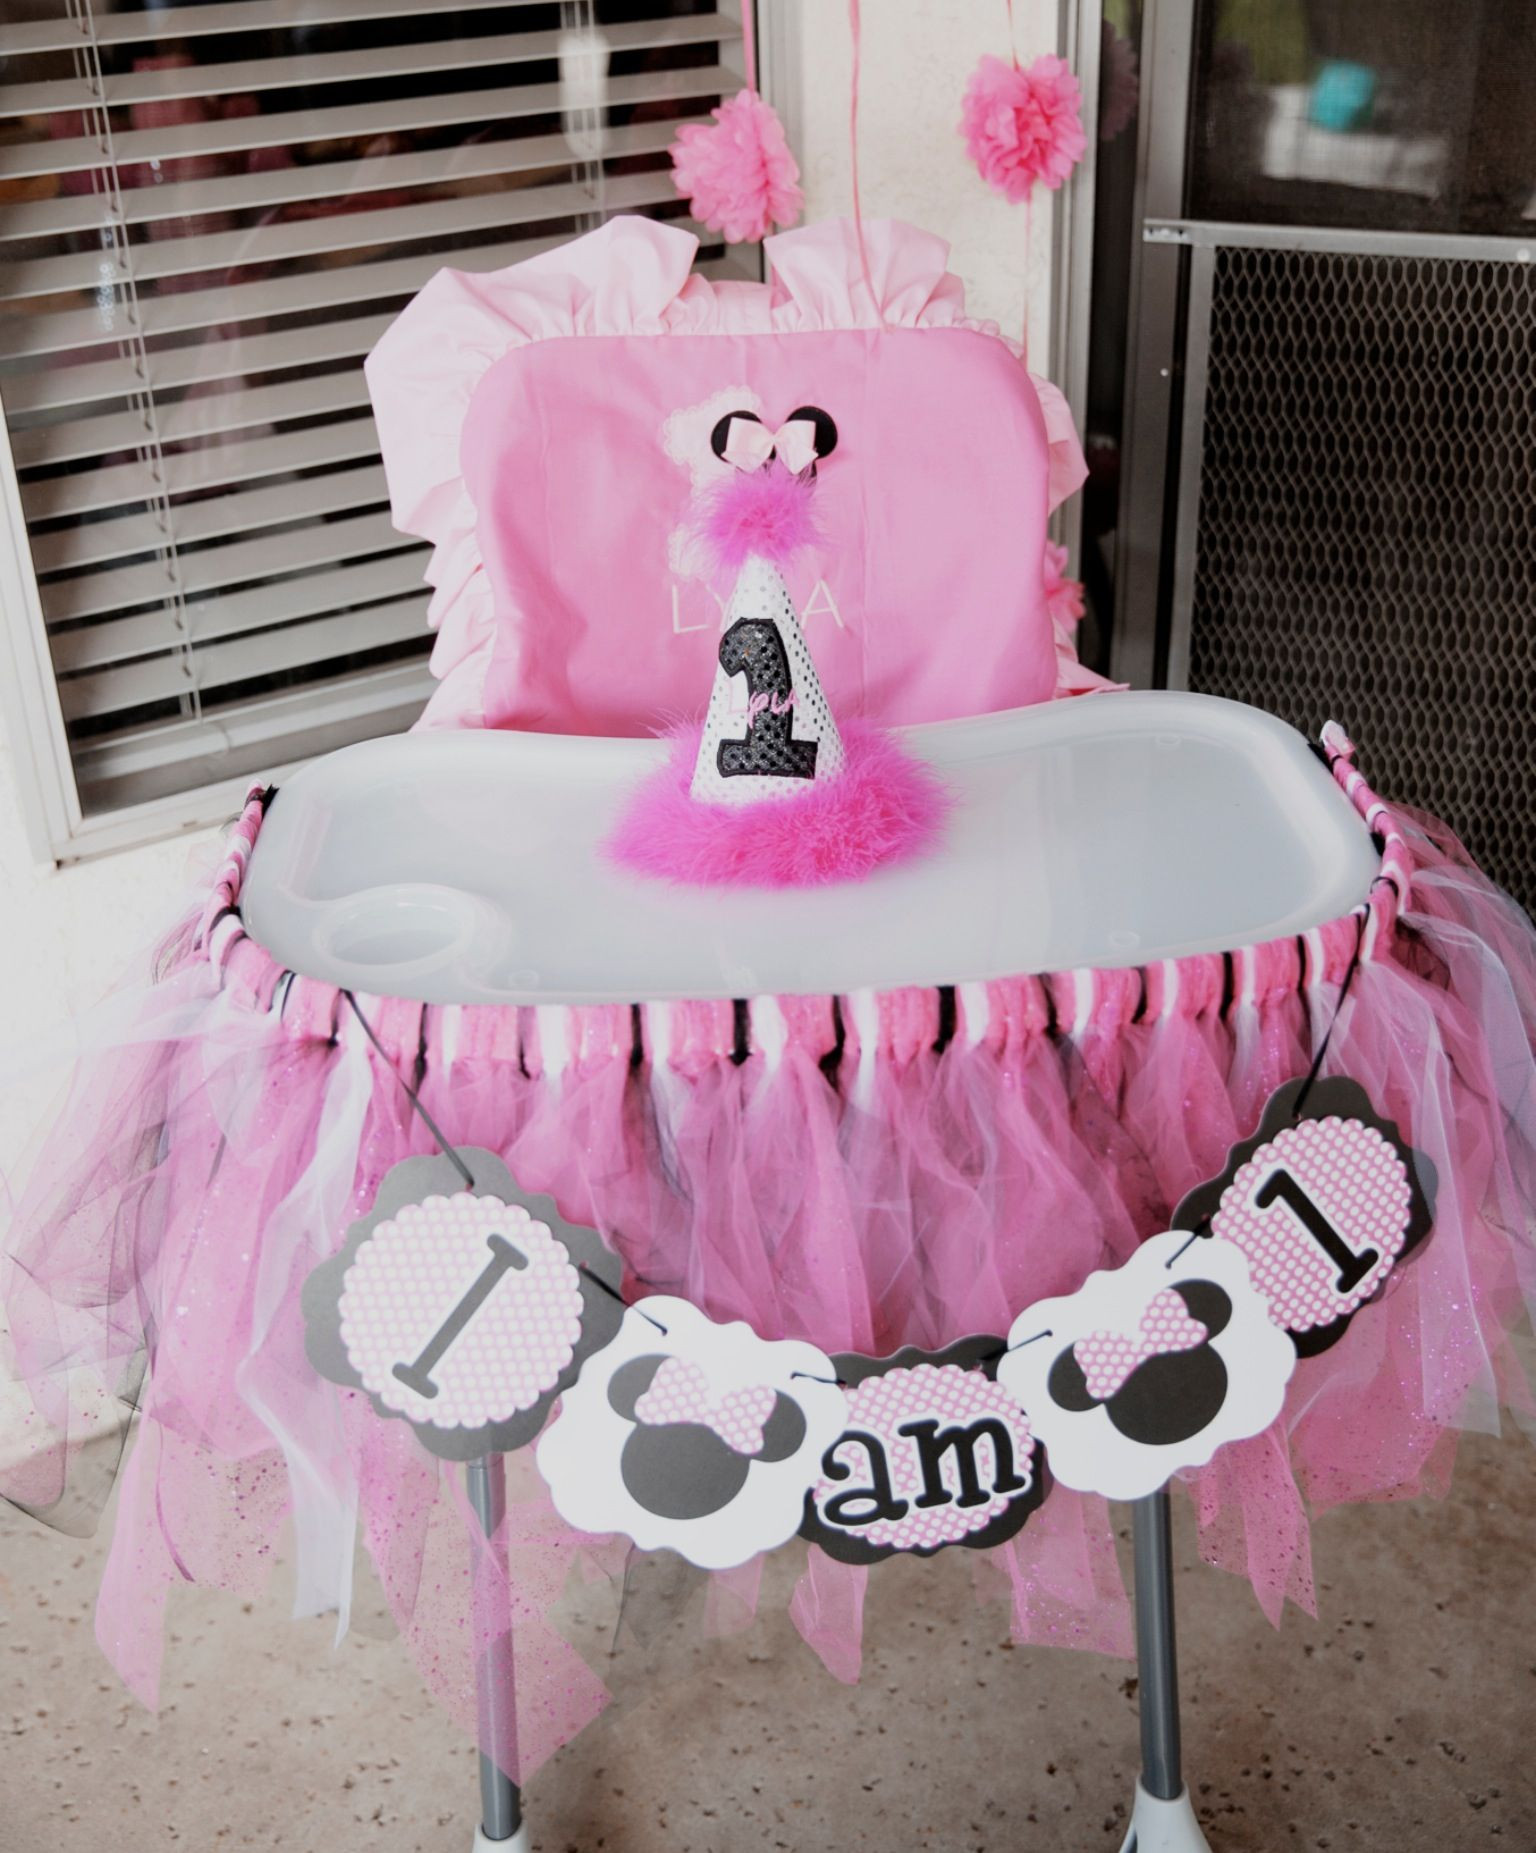 Minnie Mouse Birthday Party Decorations
 The 25 best Minnie mouse high chair ideas on Pinterest